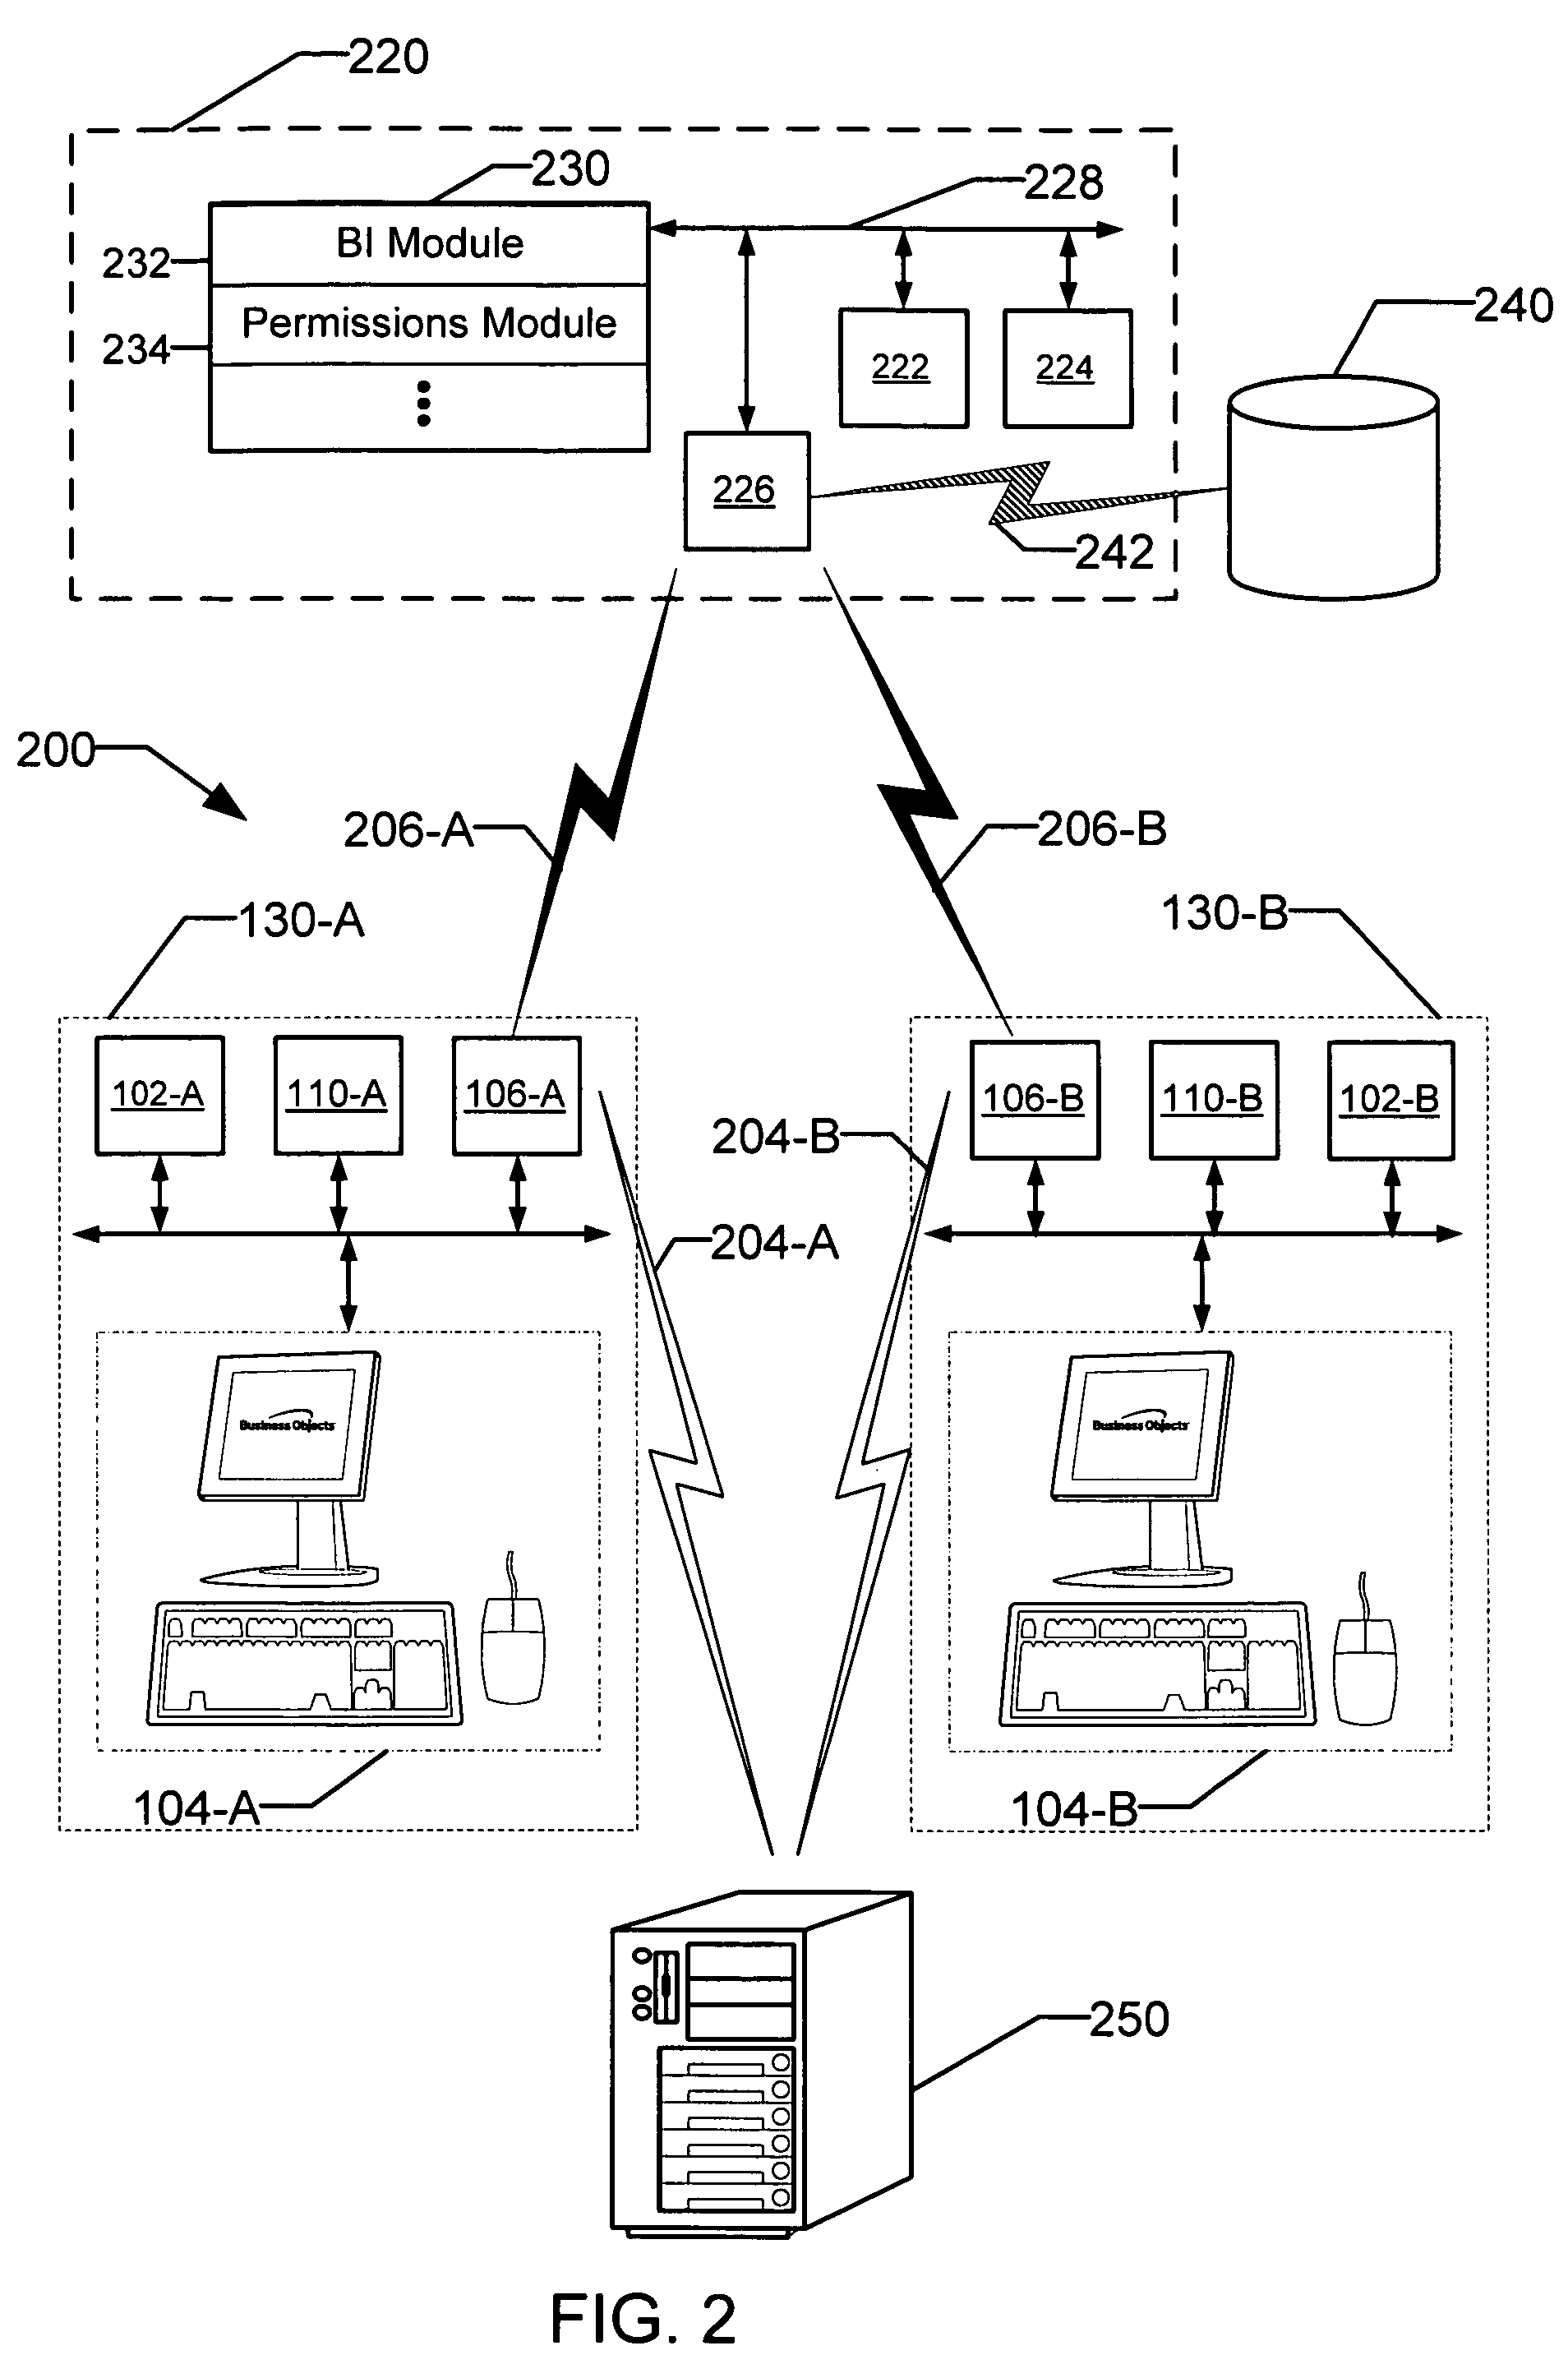 Apparatus and method for report sharing within an instant messaging framework